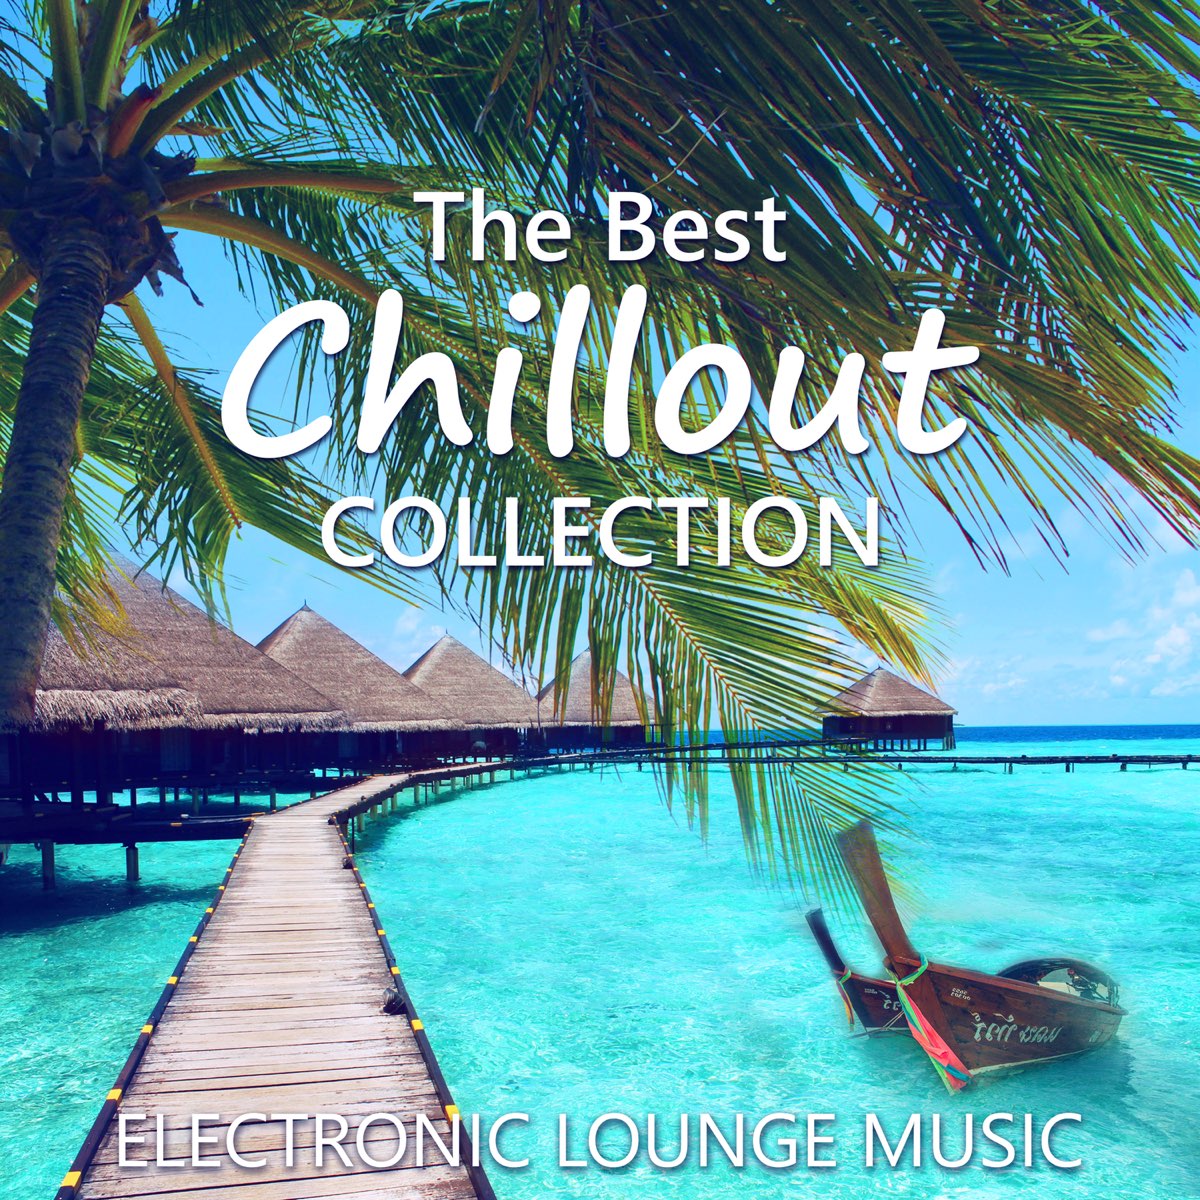 Best chillout music. Summer take your time. Album Art del Mar -Chill-out Mix - Luxury Chillout Maldives - Lounge Music - del Mar Malediven. DJ keep Calm 4u - undress my Mind [House Music]. 01. DJ keep Calm 4u - undress my Mind [House Music].